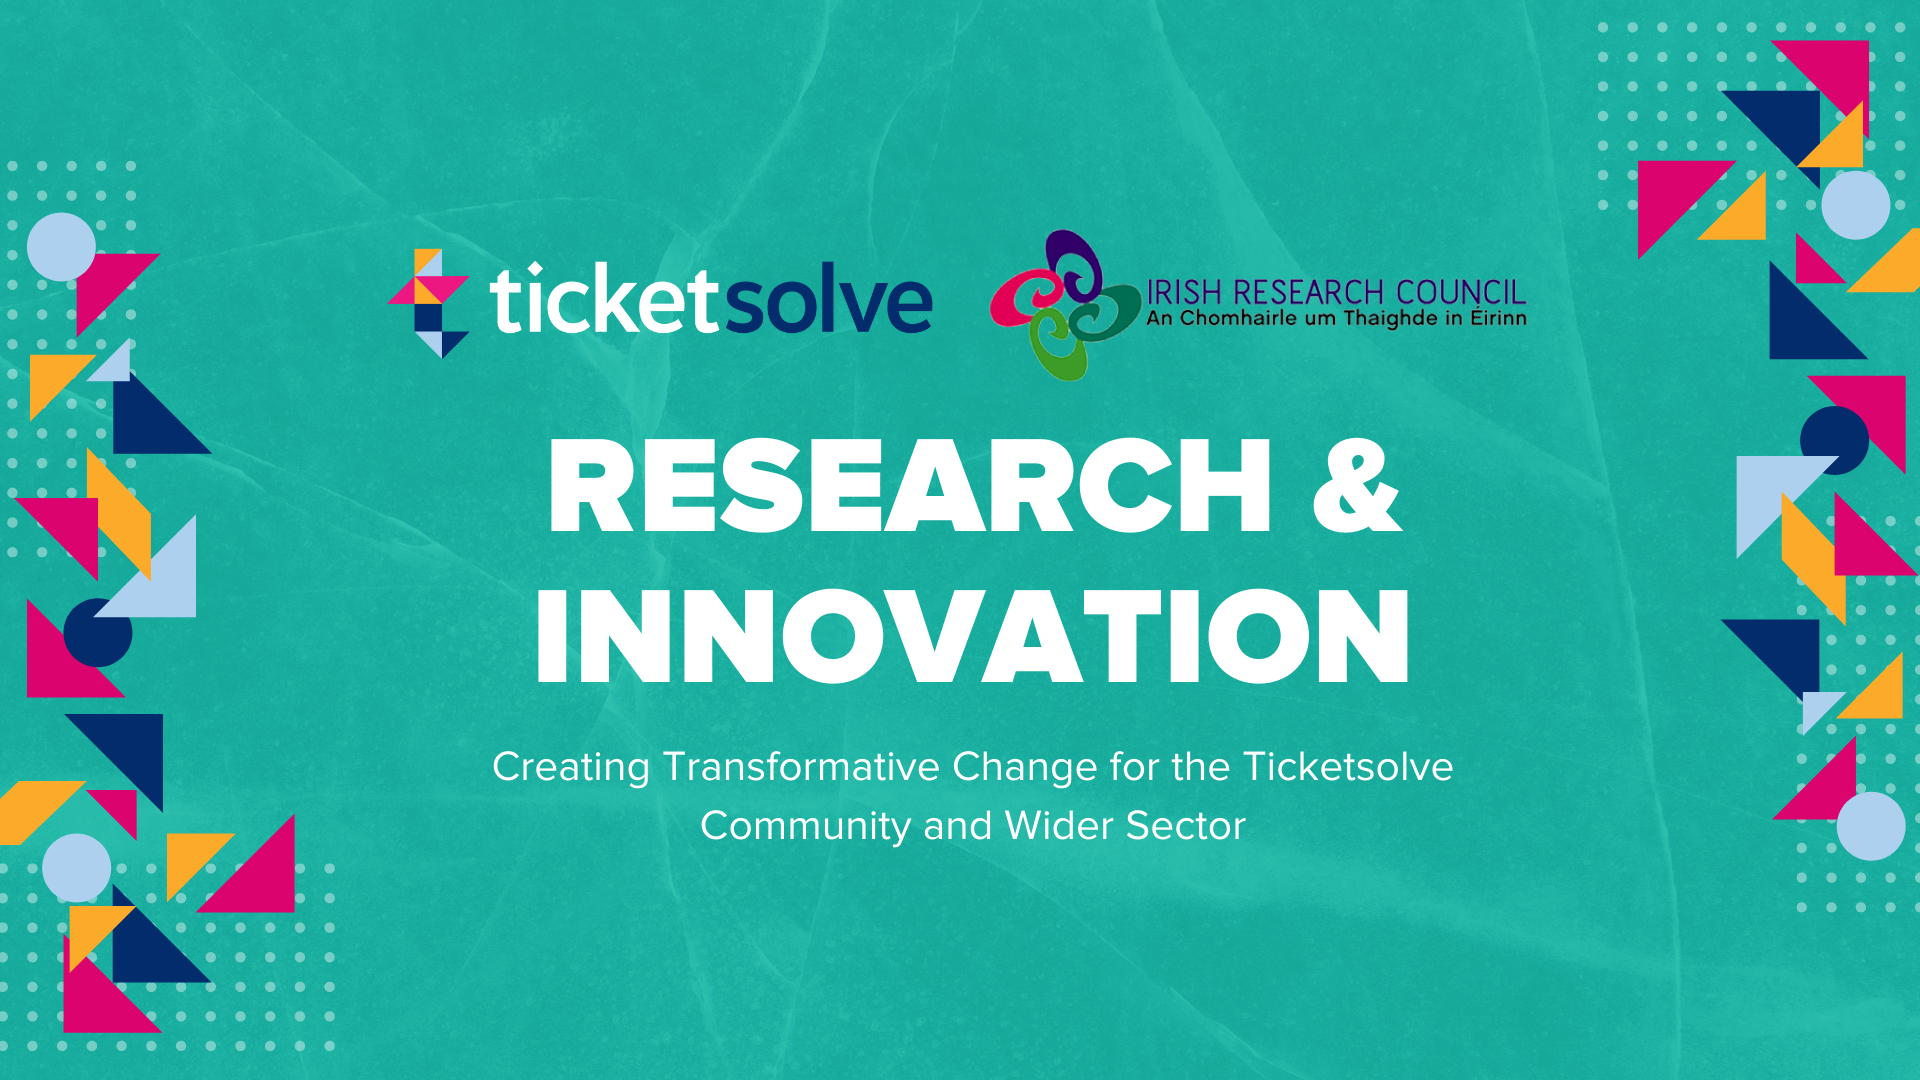 Changes are Coming: Ticketsolve Research & Innovation